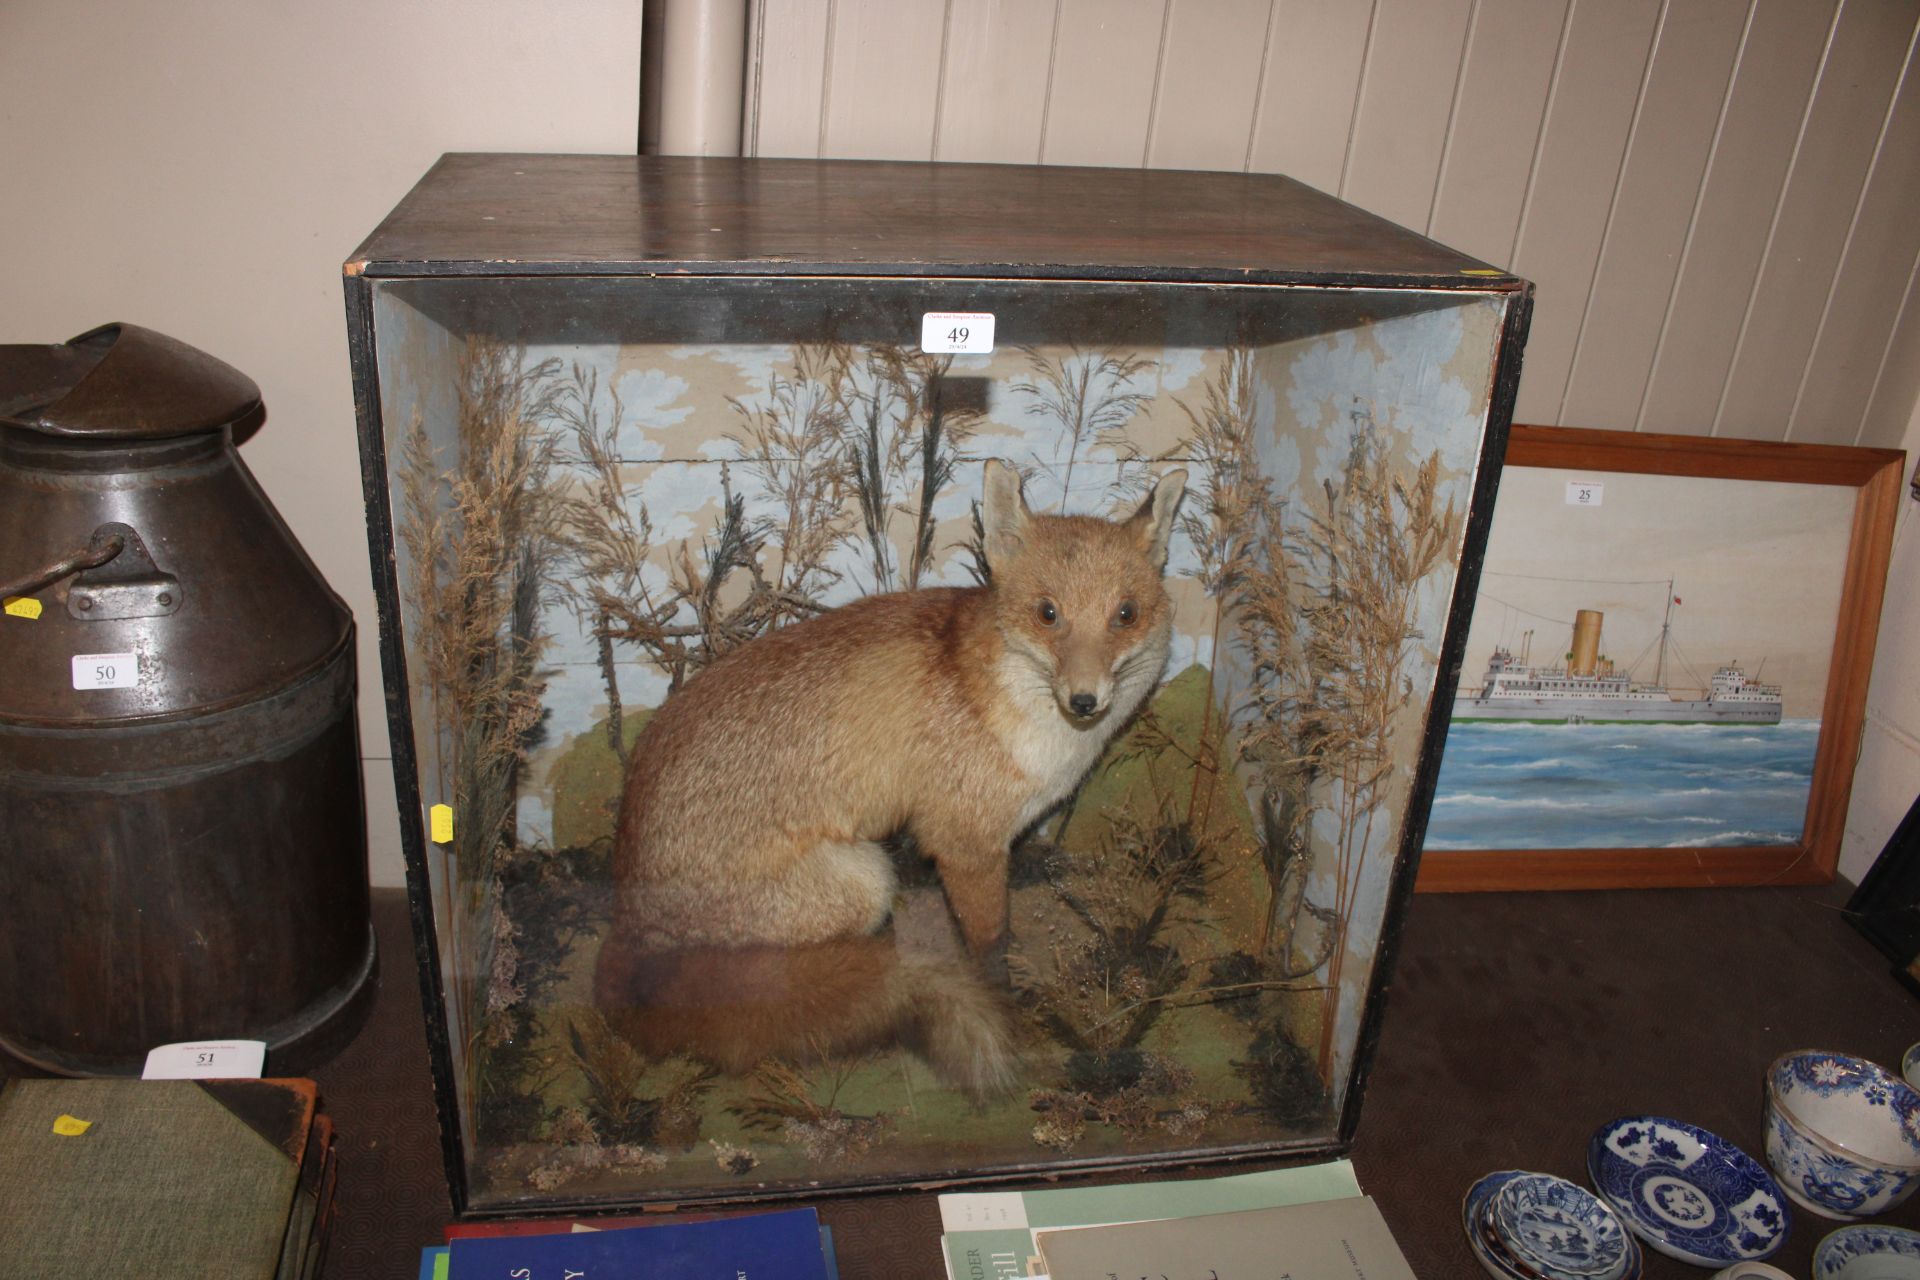 A cased and preserved study of a seated fox amongs